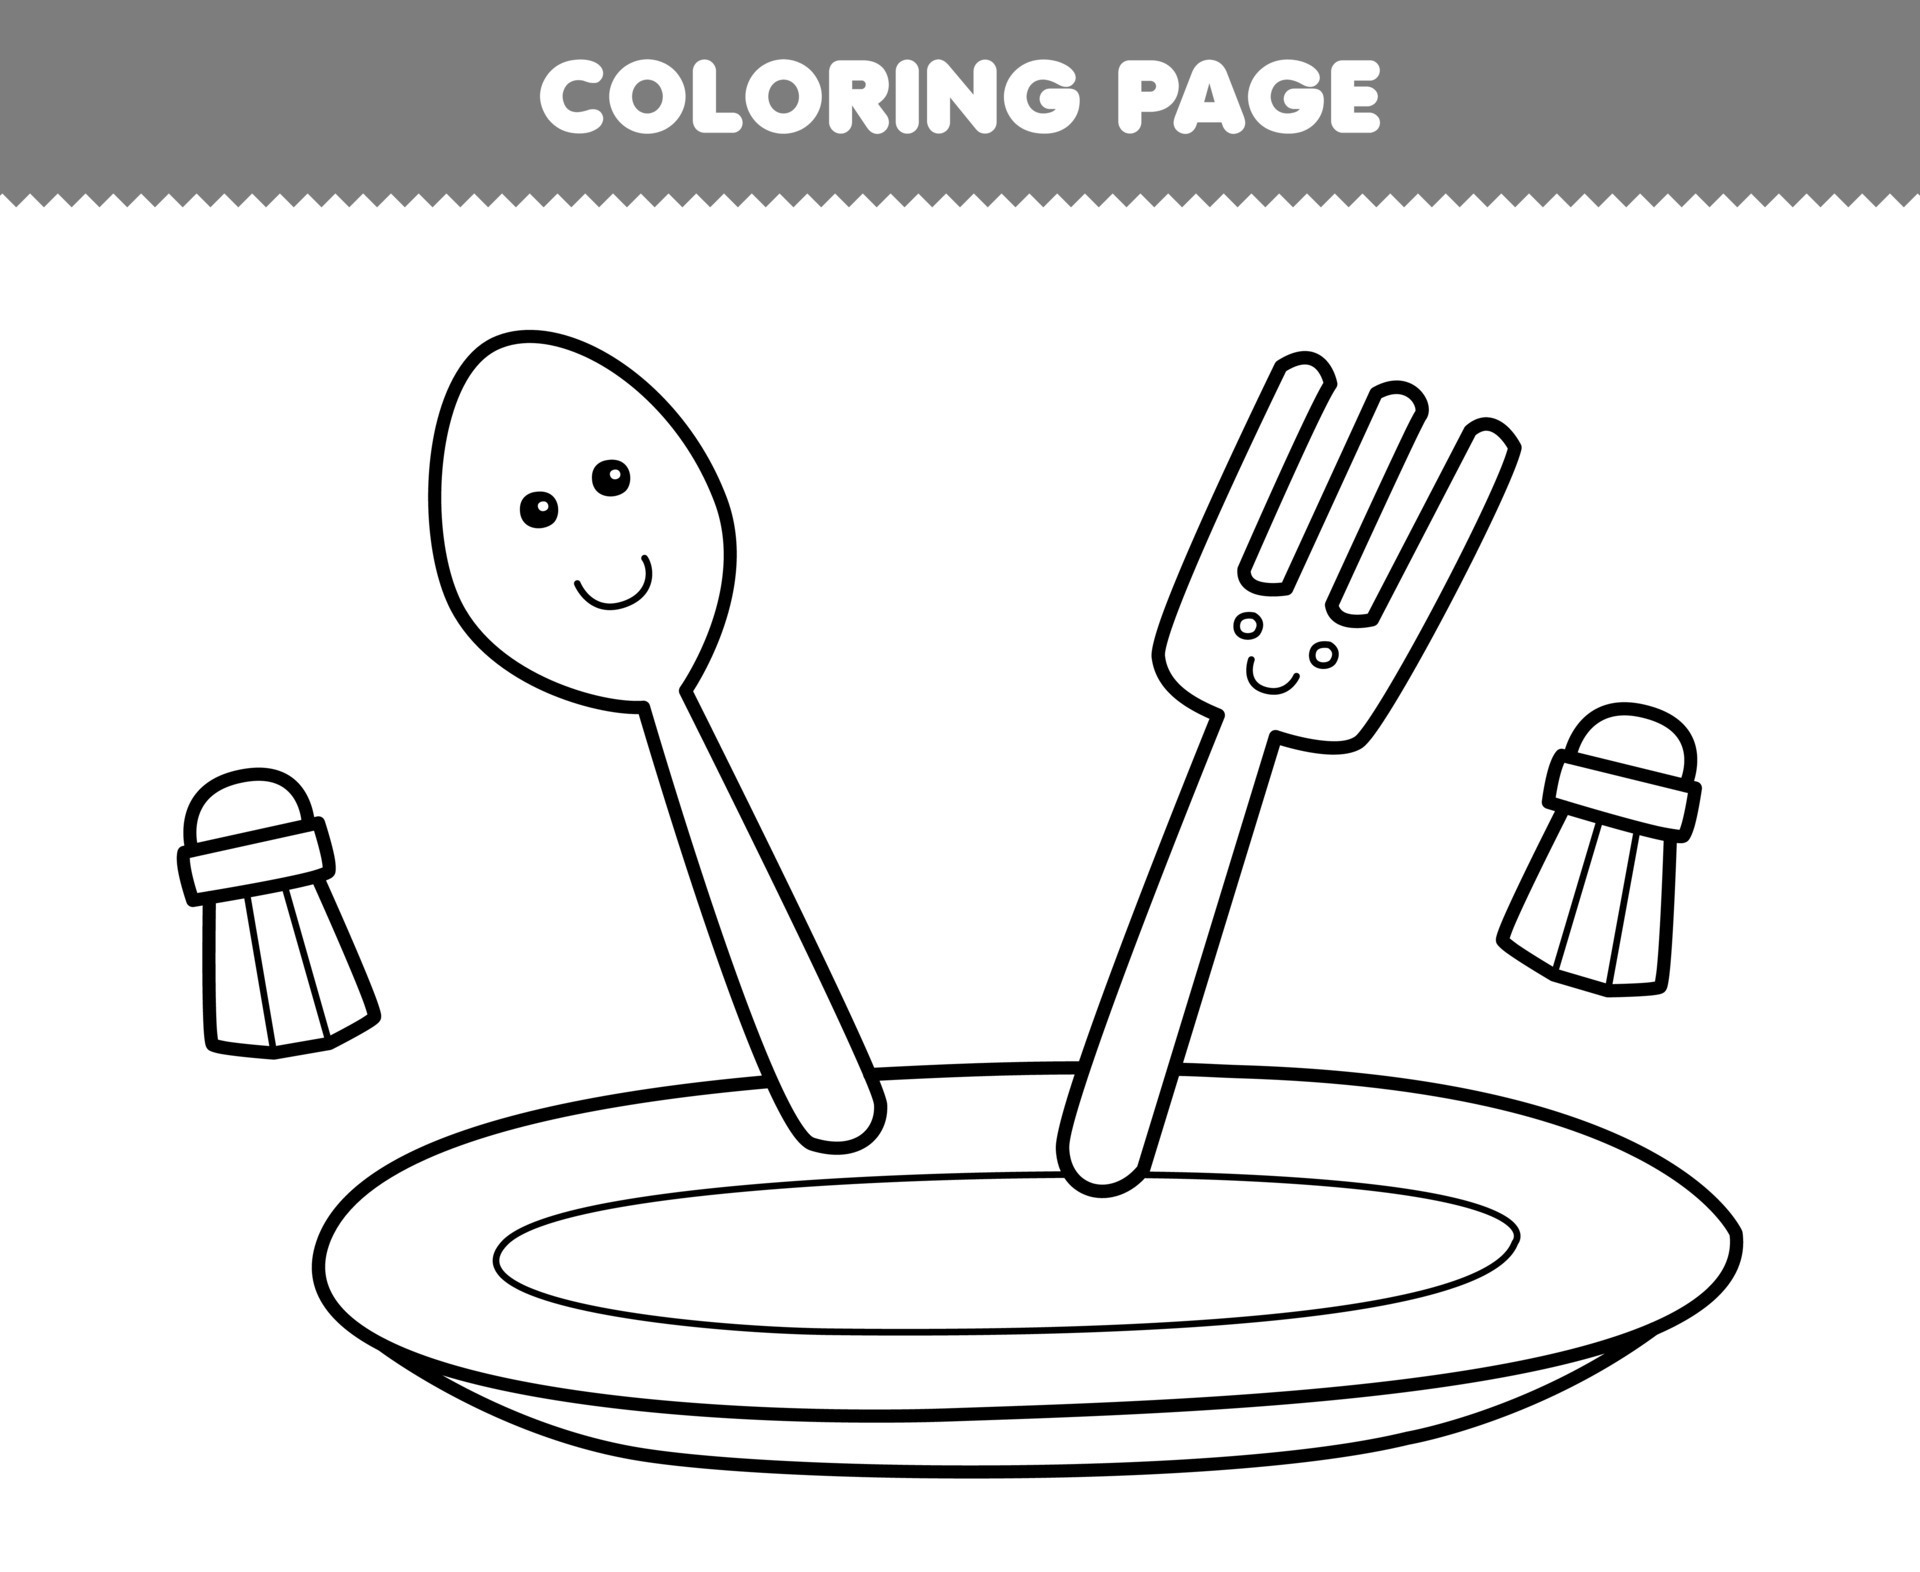 https://static.vecteezy.com/system/resources/previews/018/851/724/original/education-game-for-children-coloring-page-of-cute-cartoon-plate-fork-and-spoon-line-art-printable-tool-worksheet-vector.jpg